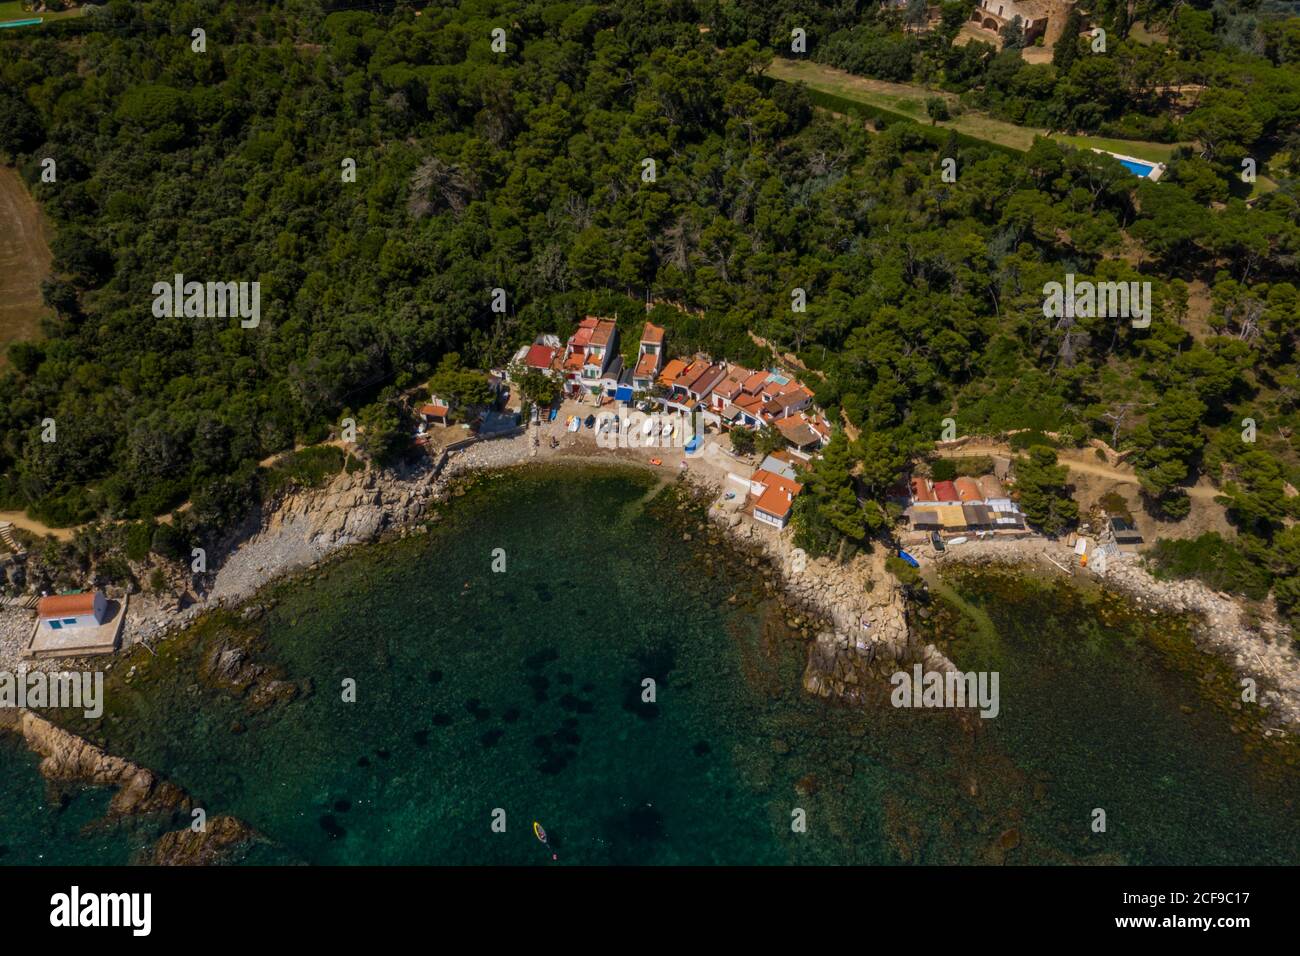 Aerial view of Cala S'Alguer in Palamos on the Costa Brava in Catalonia, Spain Stock Photo